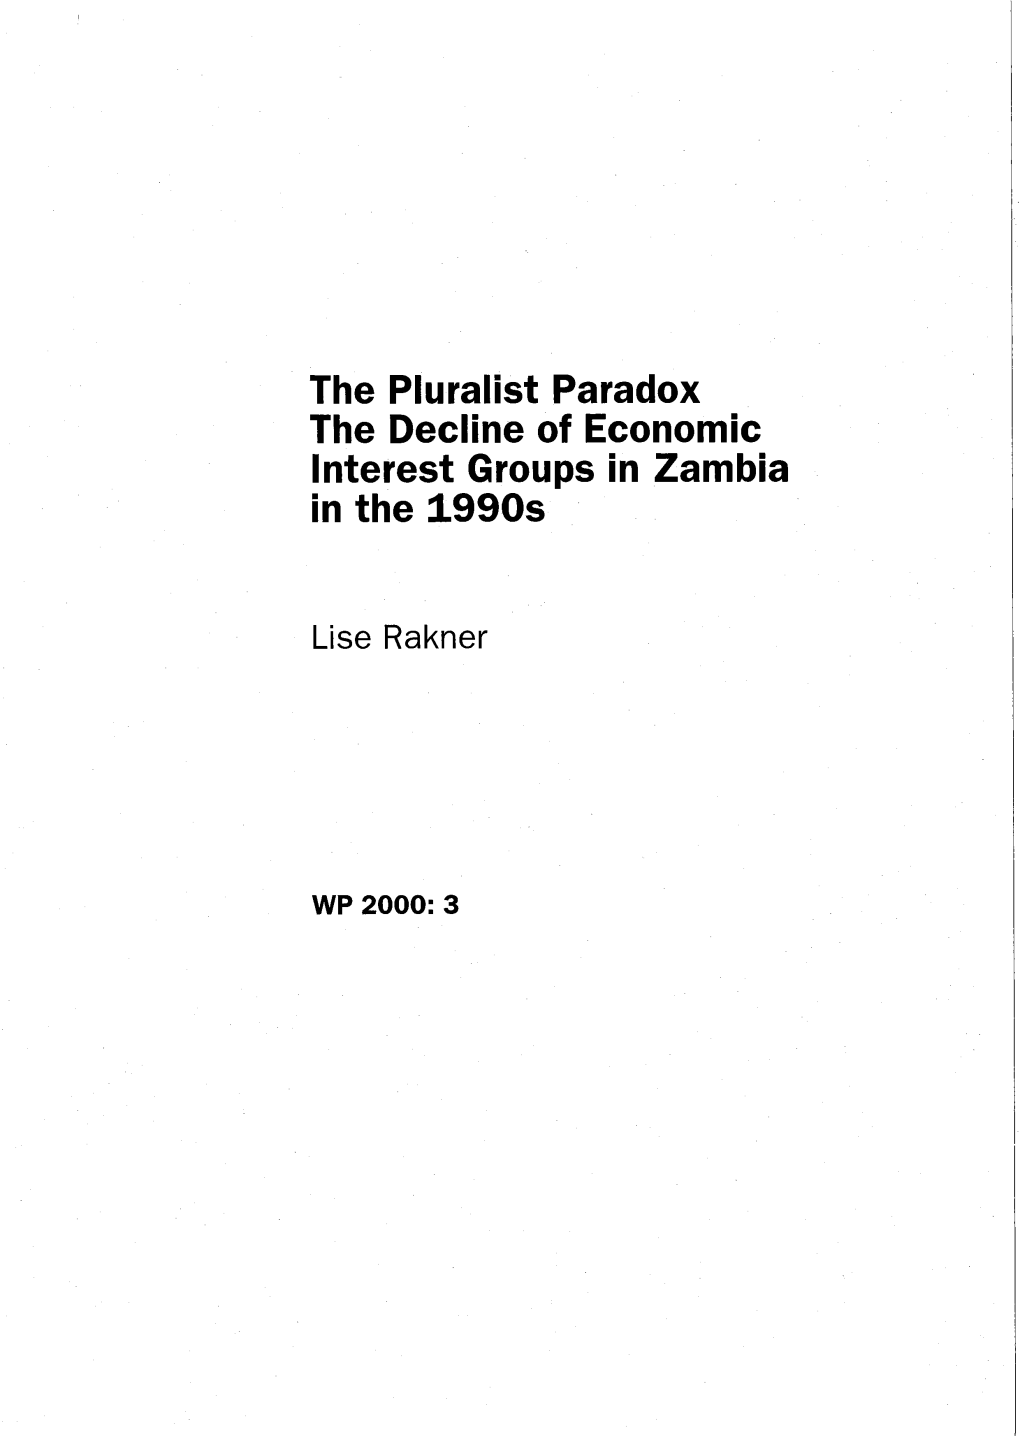 The Pluralist Paradox the Decline of Economic Interest Groups in Zambia in the 1990S